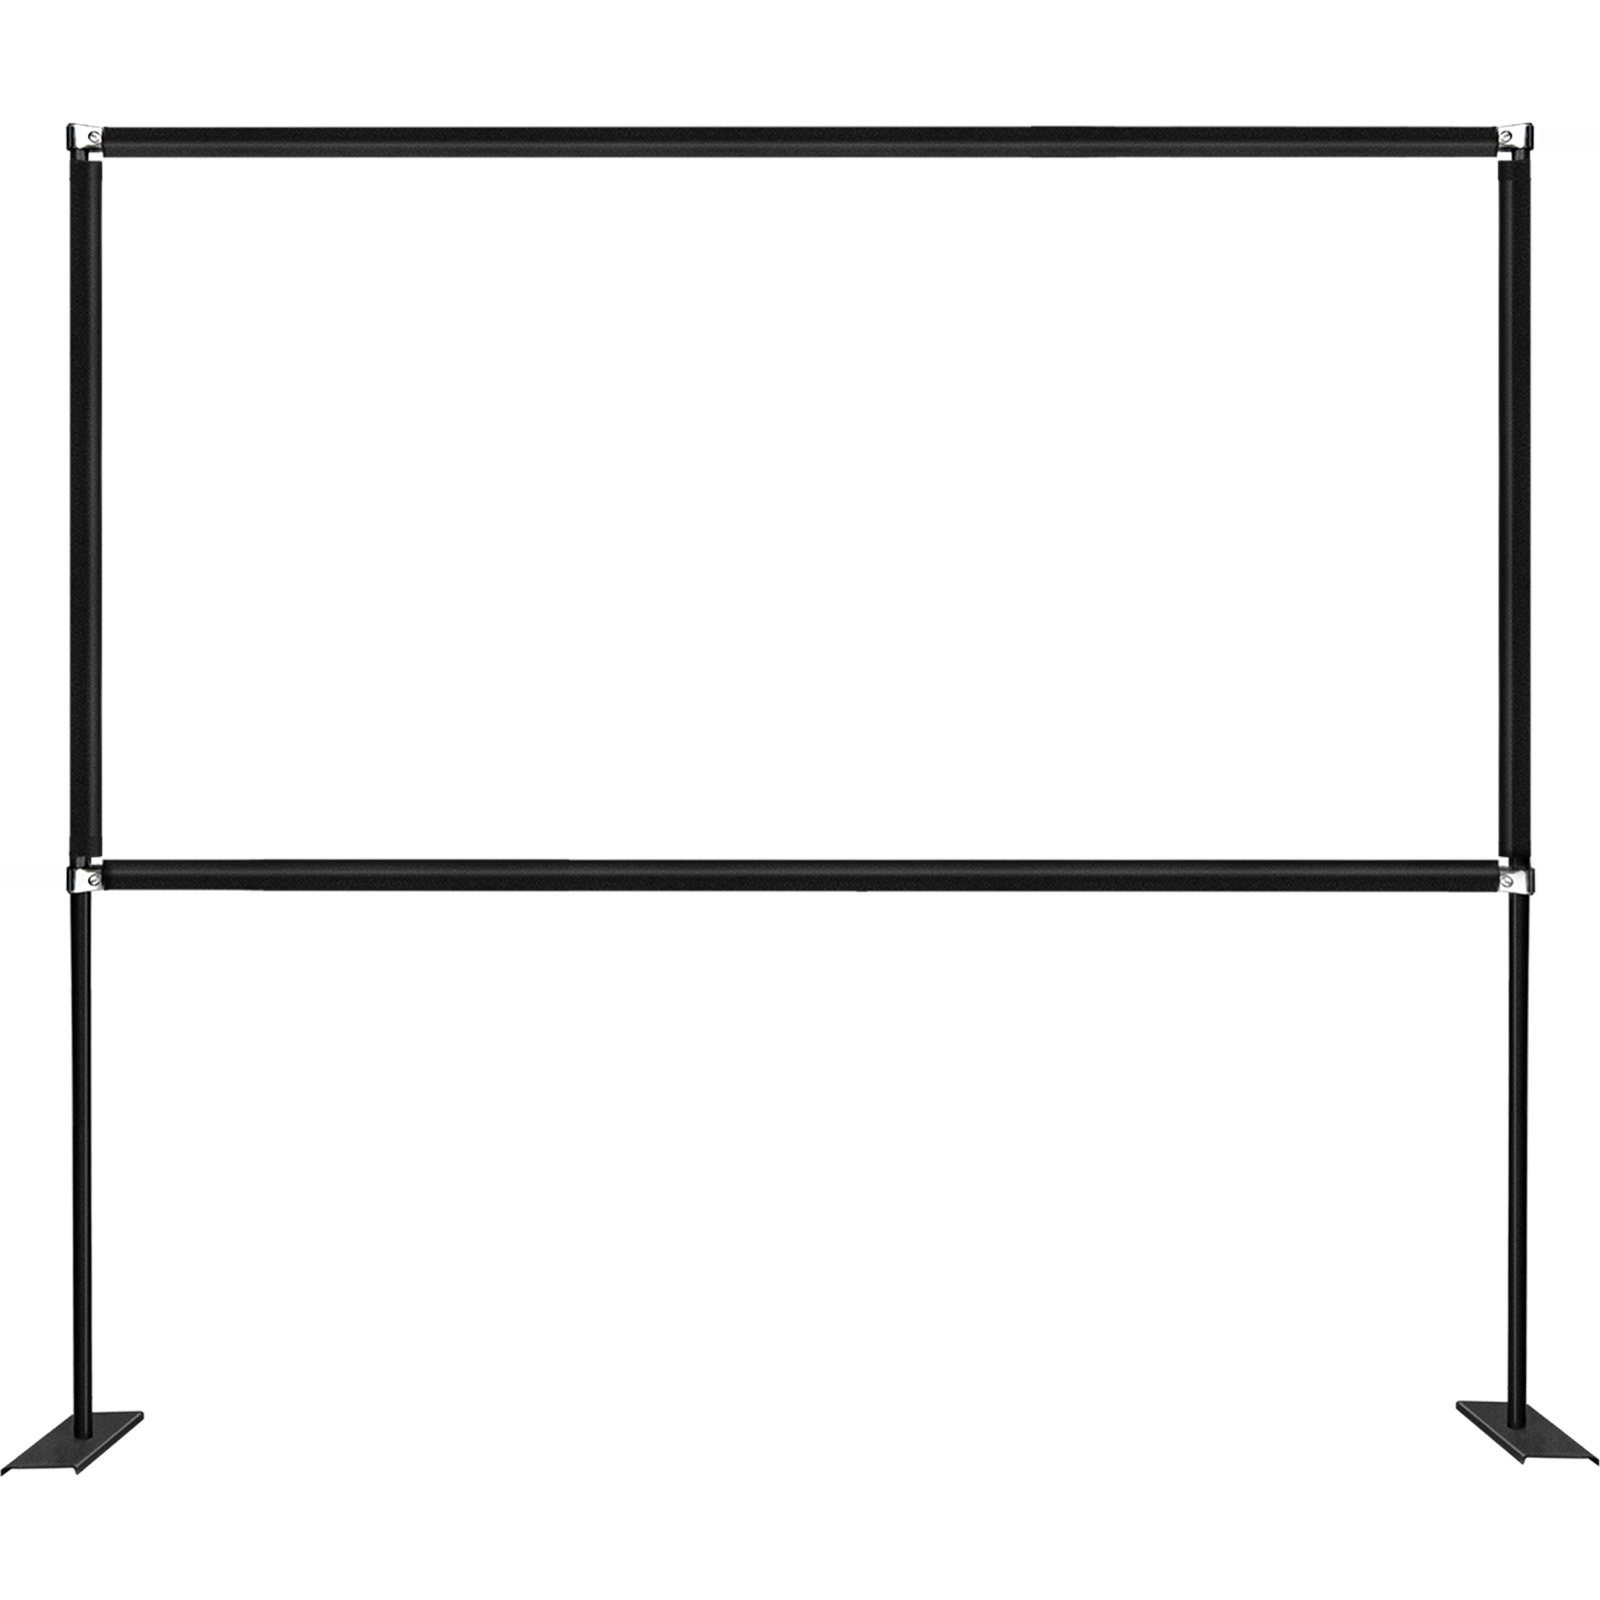 Vevor Outdoor Movie Screen W/ Stand Portable Projector Screen 100" 16:9 Hd 4k от Vevor Many GEOs